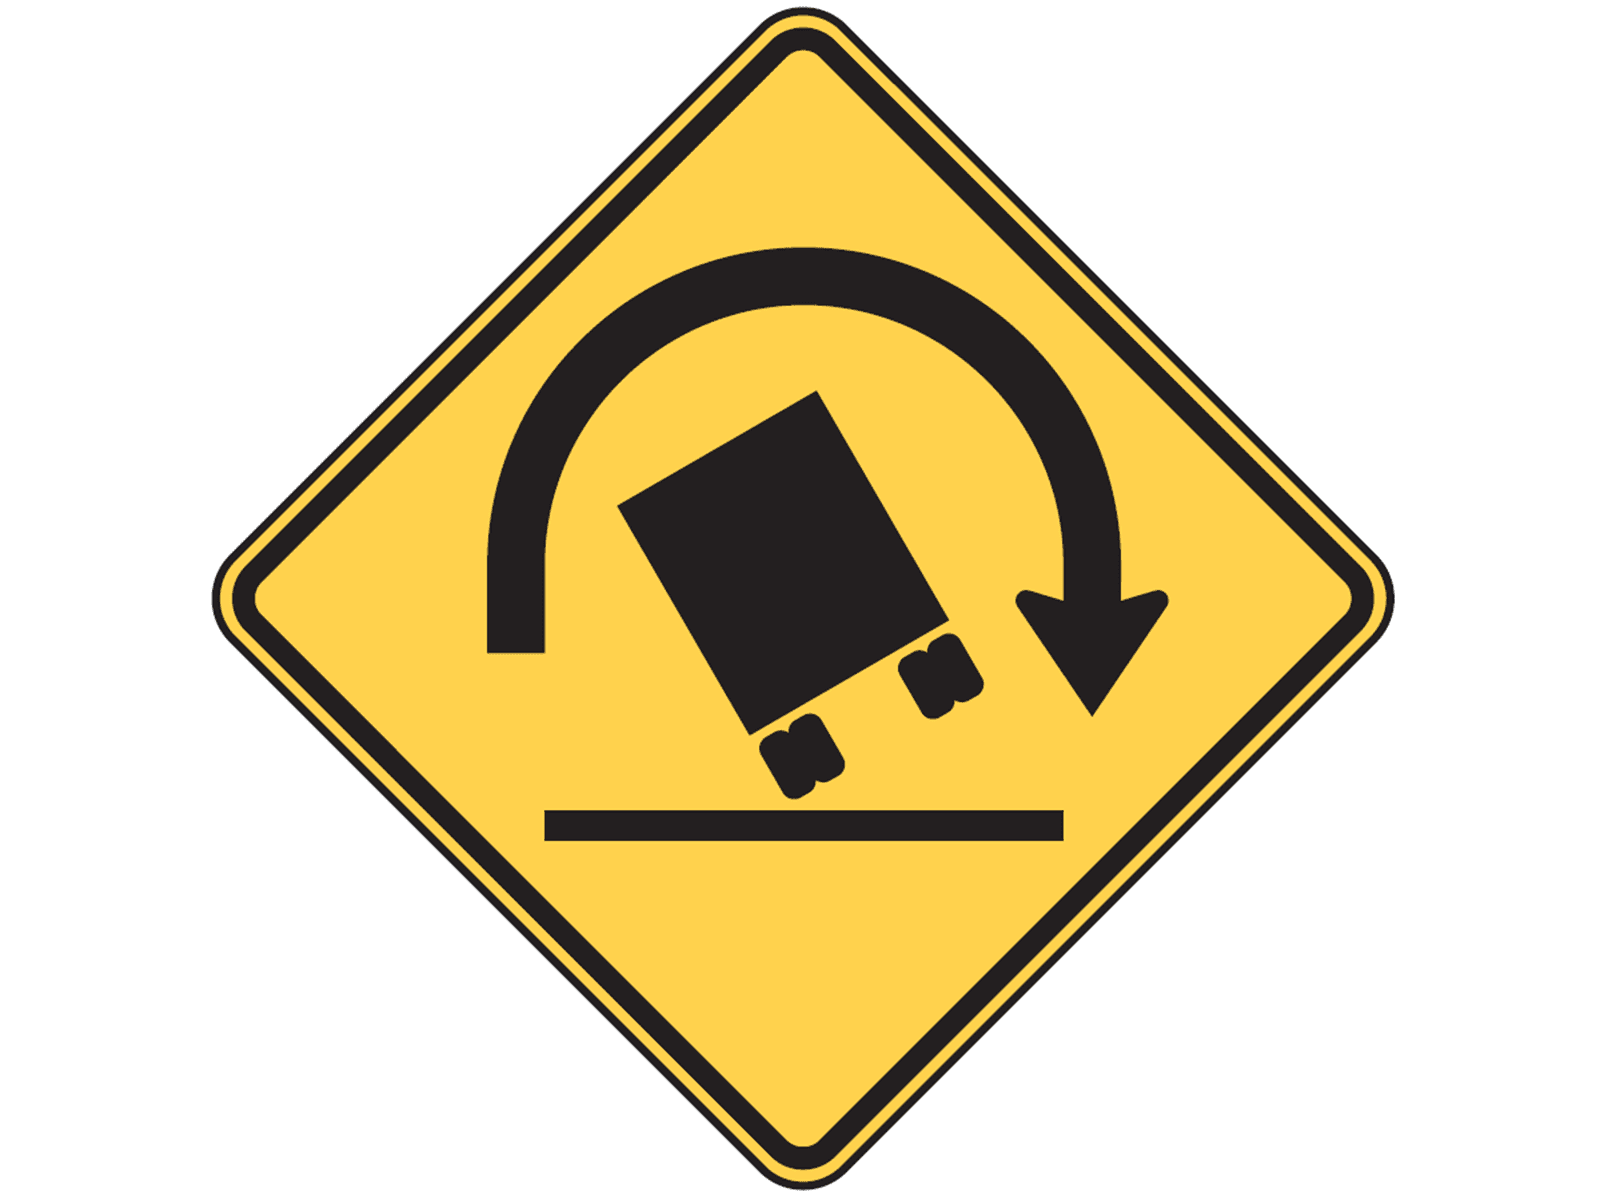 Truck Rollover Warning W1-13 - W1: Curves and Turns